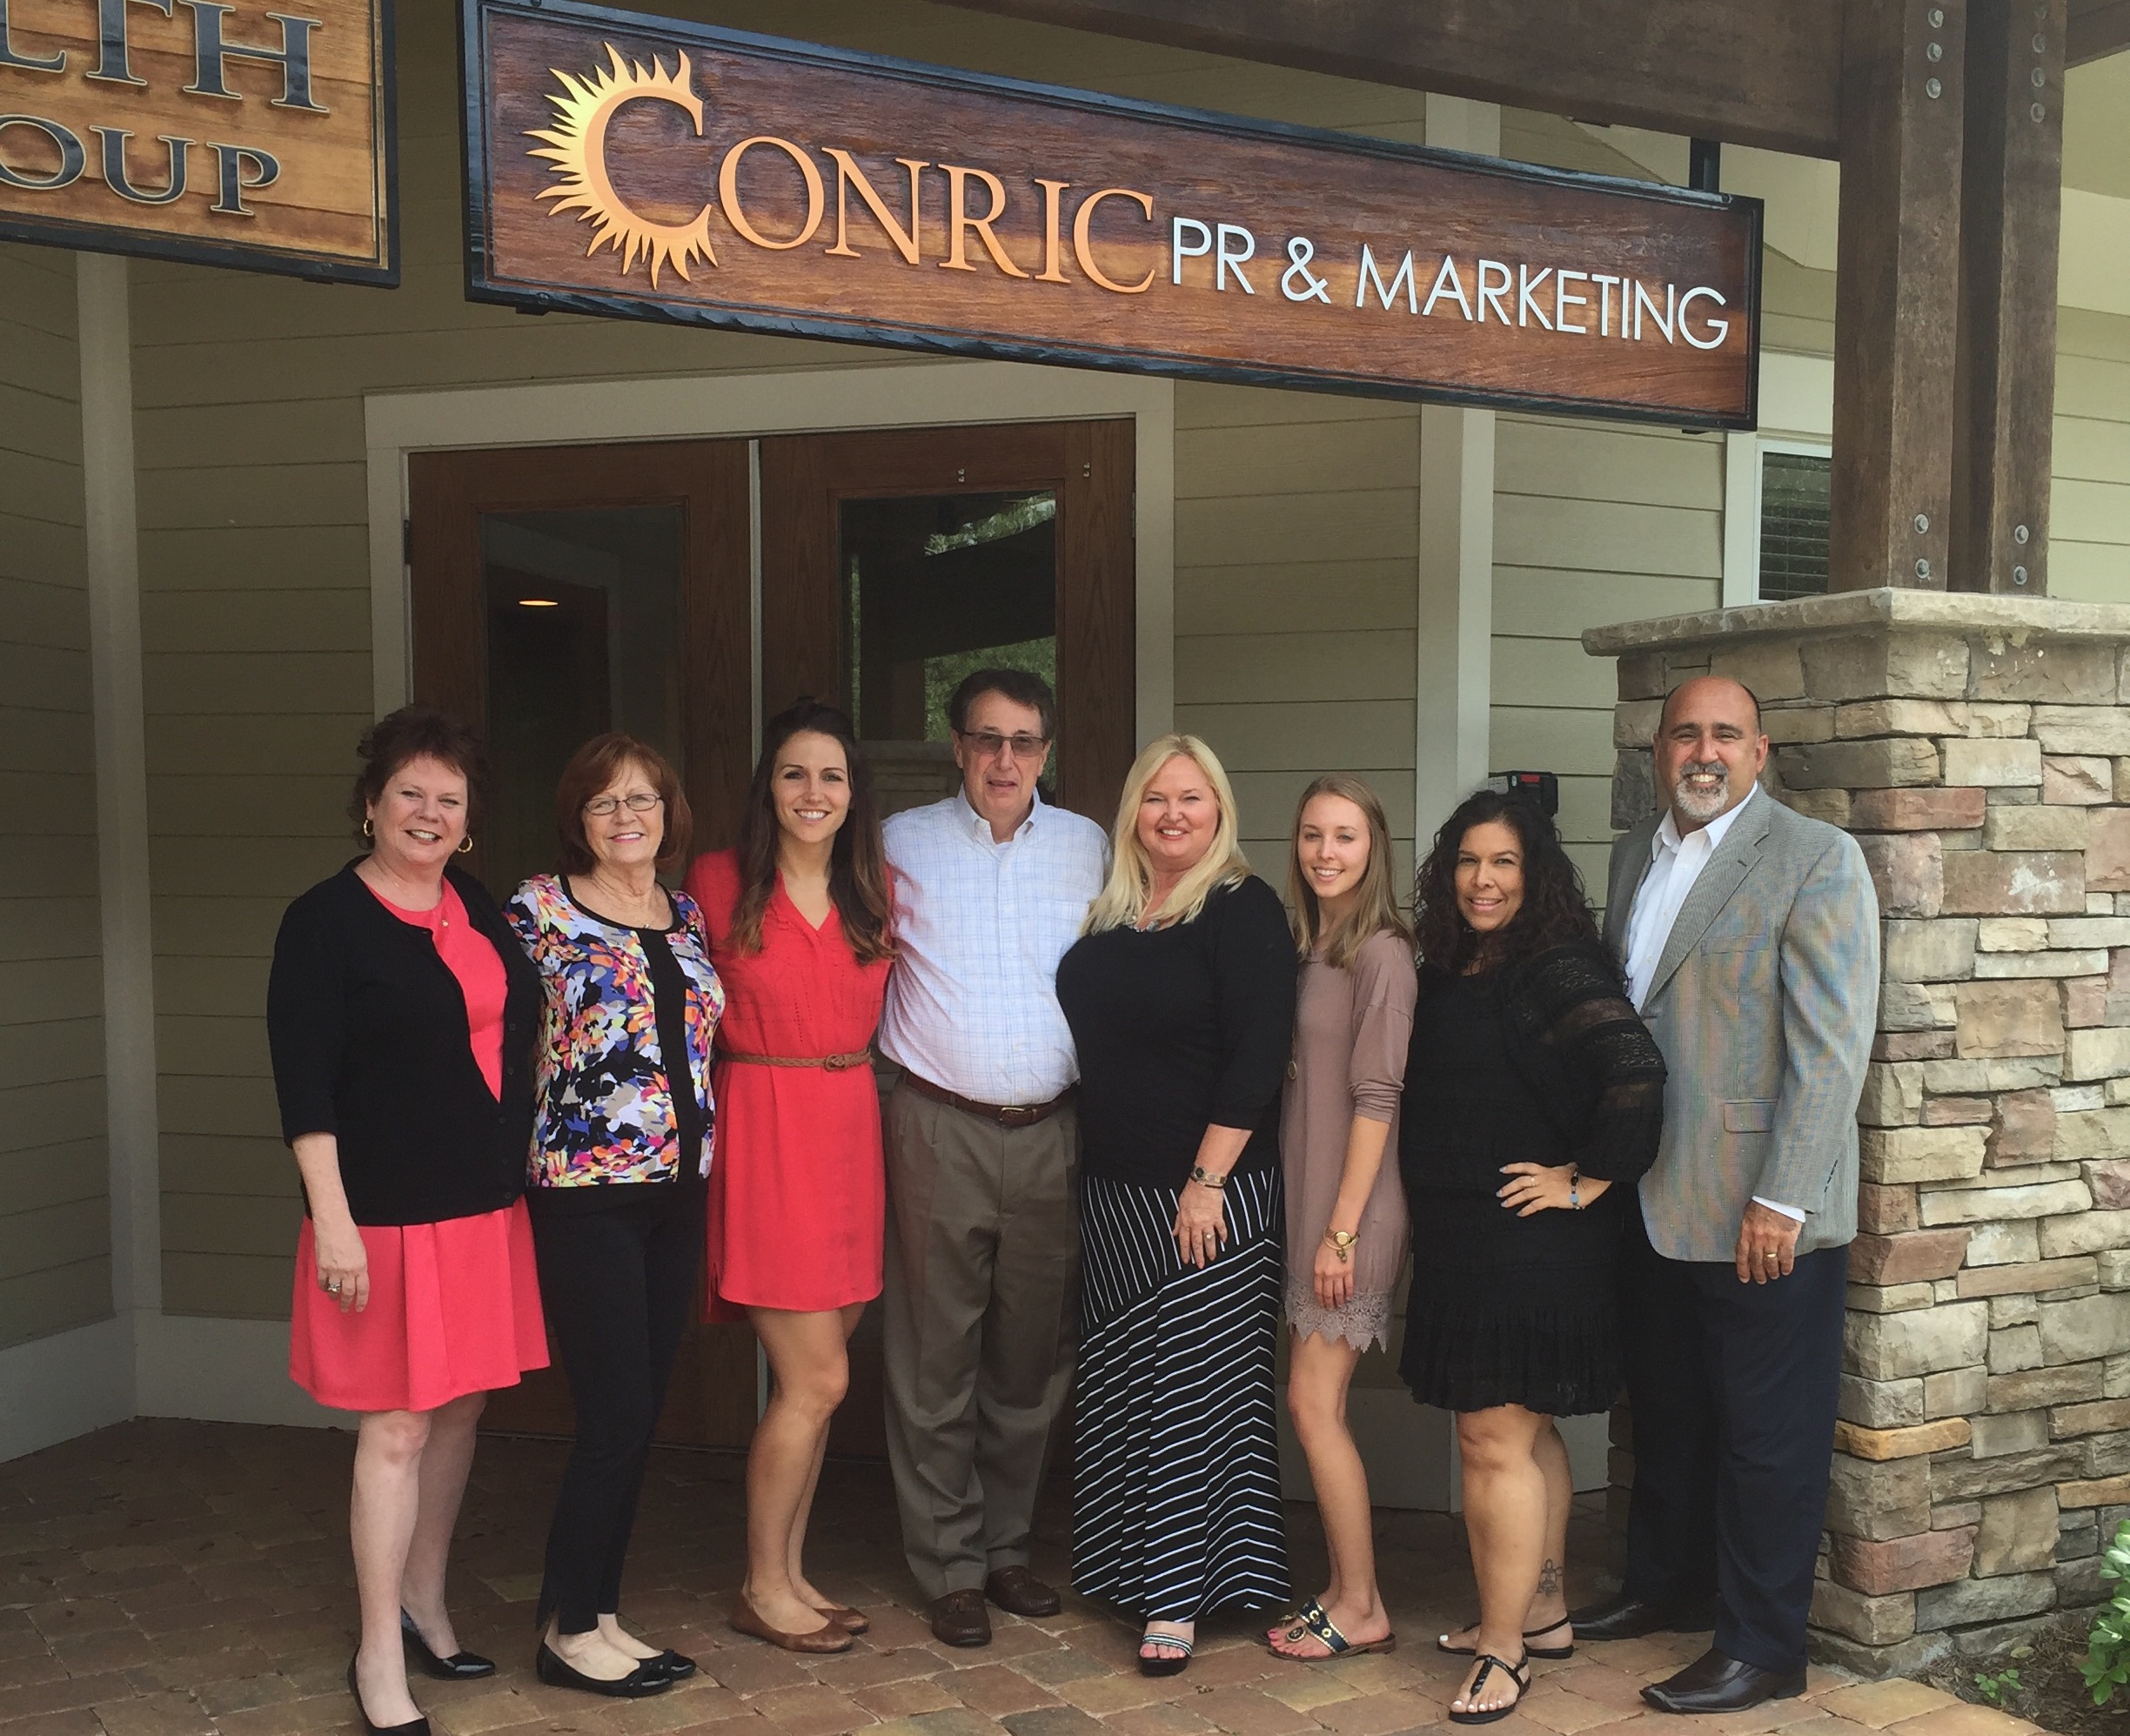 CONRIC PR & Marketing to host open house at NEW Office